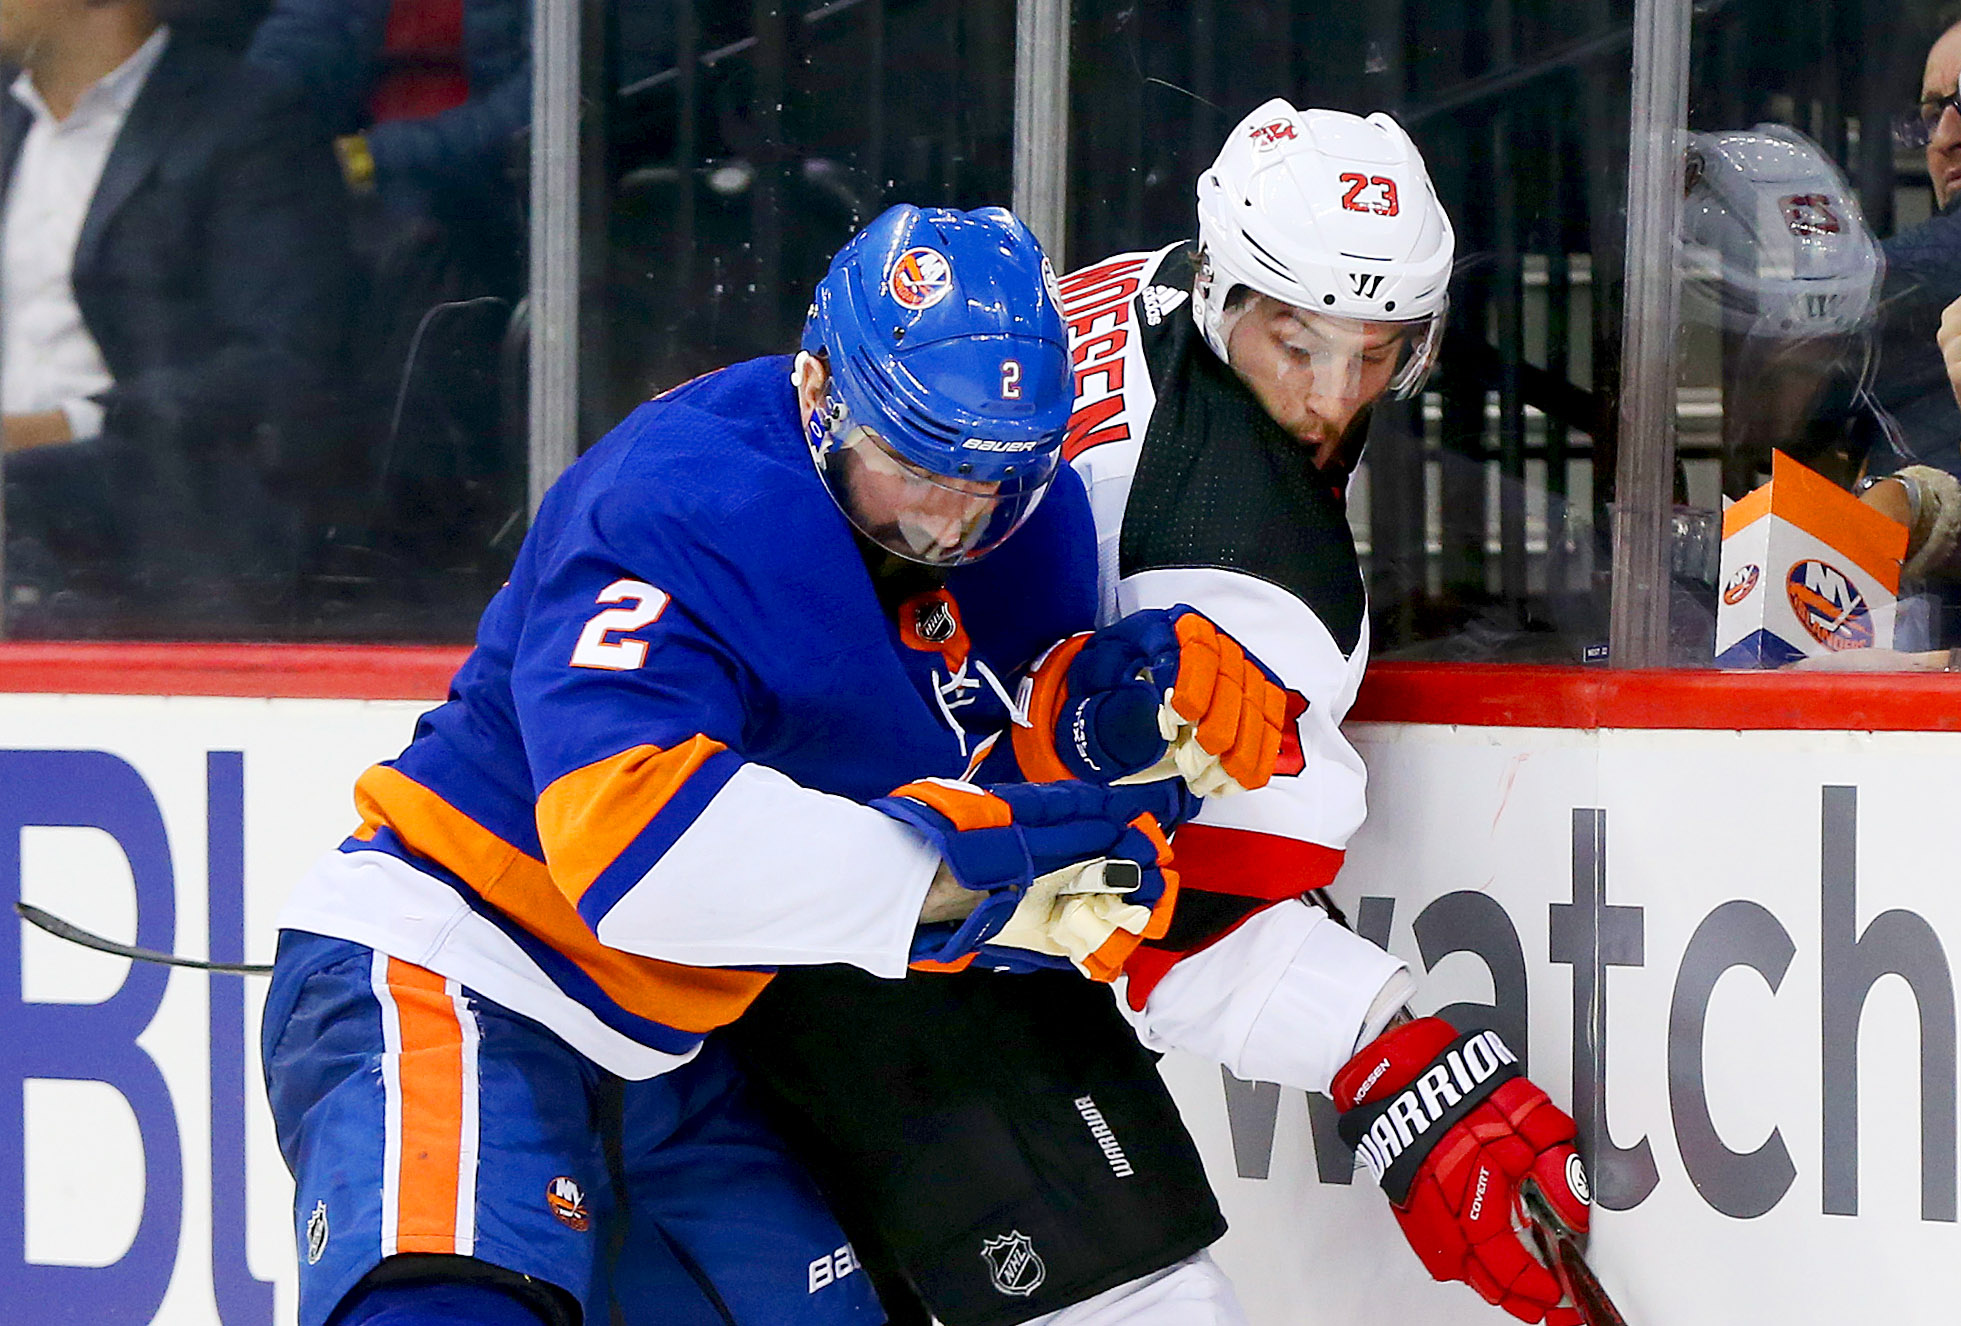 Jan 16, 2018; Brooklyn, NY, USA; New Jersey Devils right wing Stefan Noesen (23) and New York Islanders defenseman Nick Leddy (2) battle for position along the boards during the third period at Barclays Center. Mandatory Credit: Andy Marlin-USA TODAY Sports